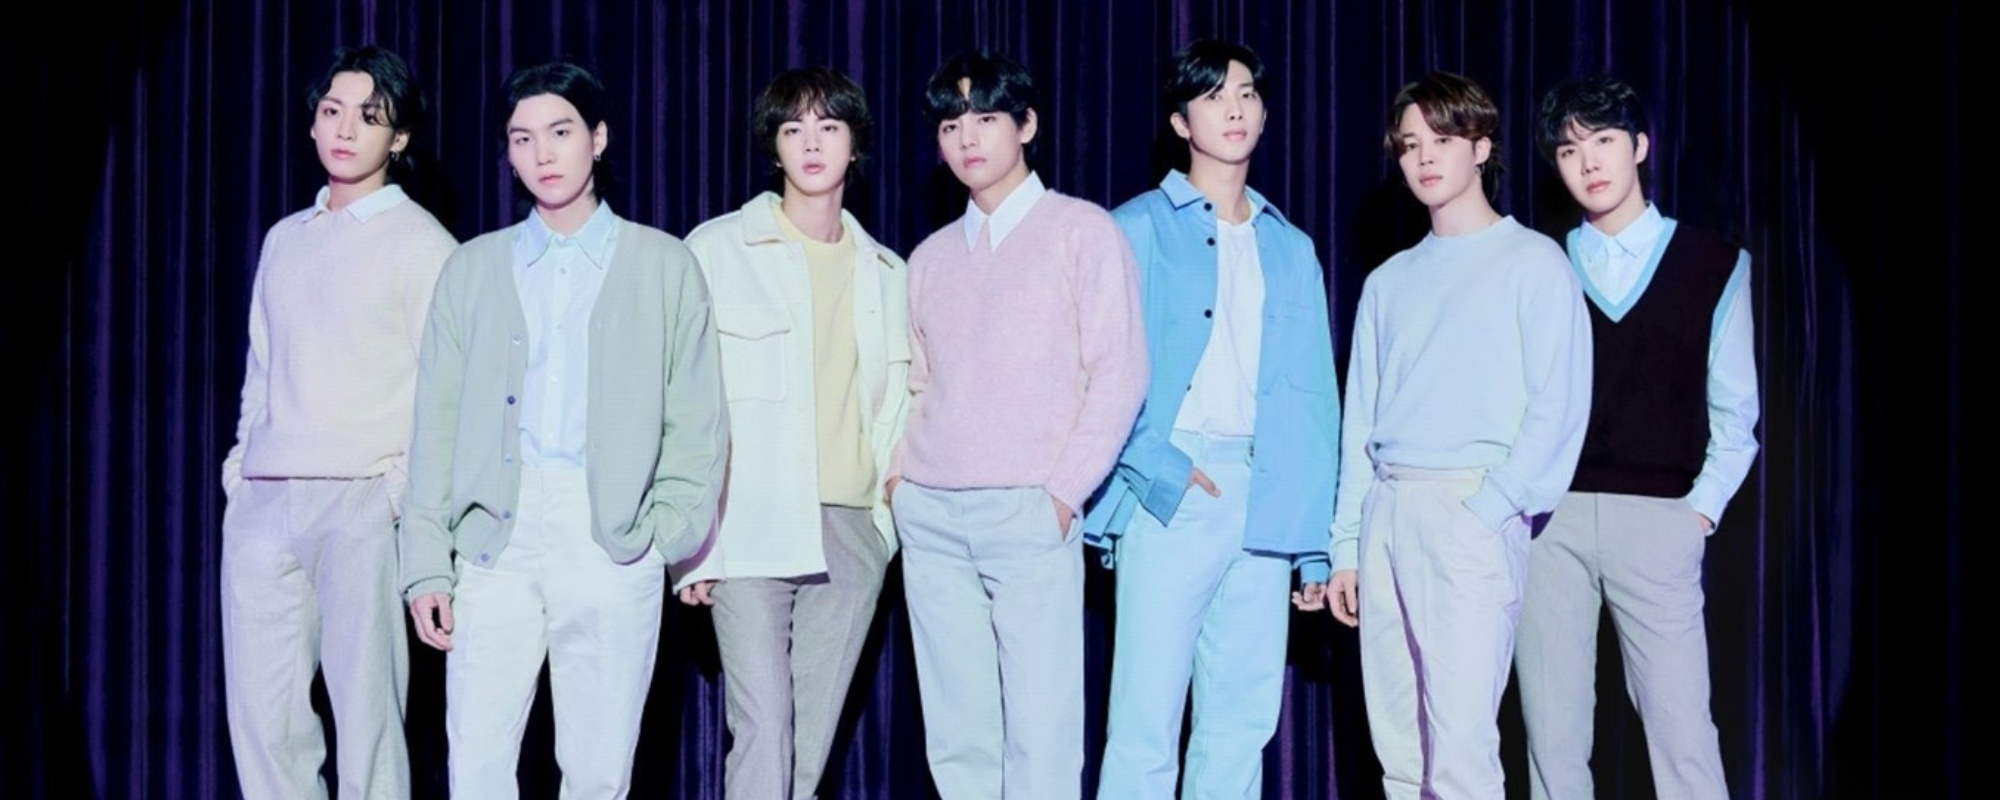 BTS Celebrates 10th Anniversary with New Single “Take Two”